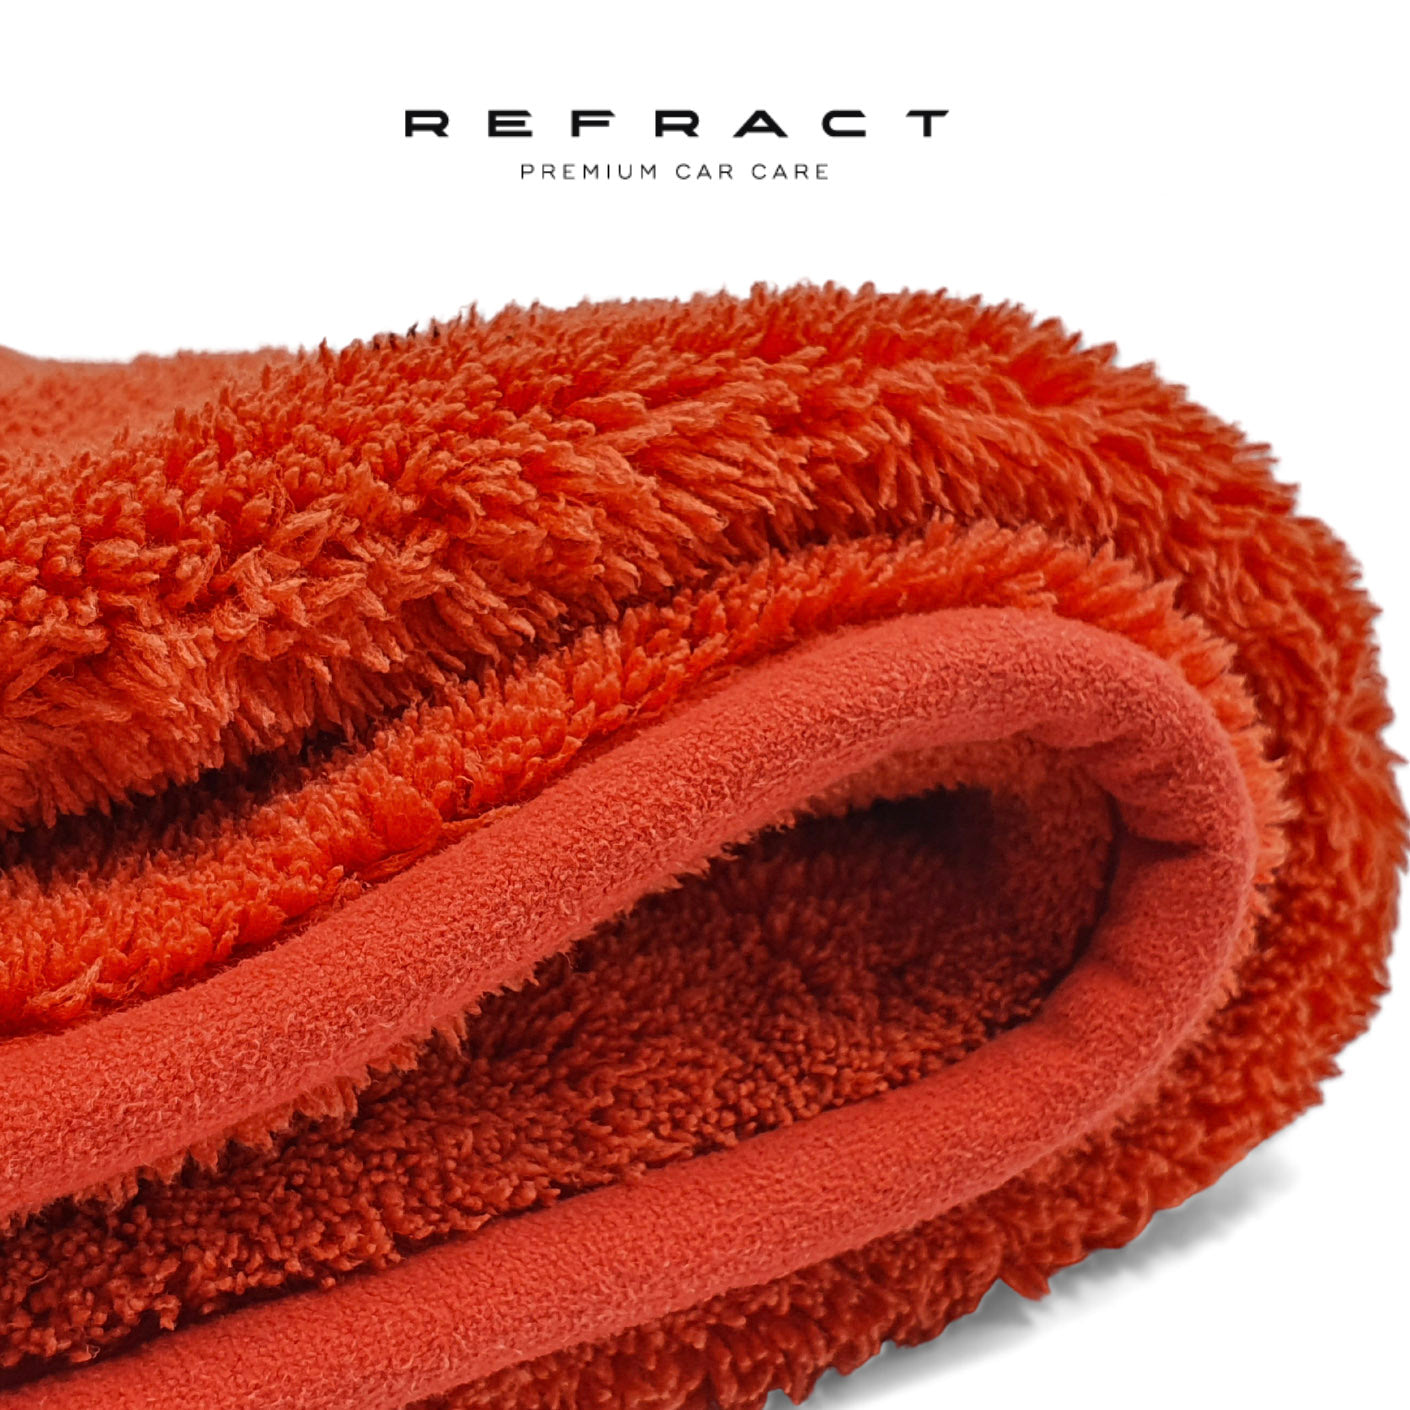 Refract Premium Car Care Products REFRACT Big Red - Large Thick Plush Polish, Sealant & Wax Microfiber Removal Towel $23.95